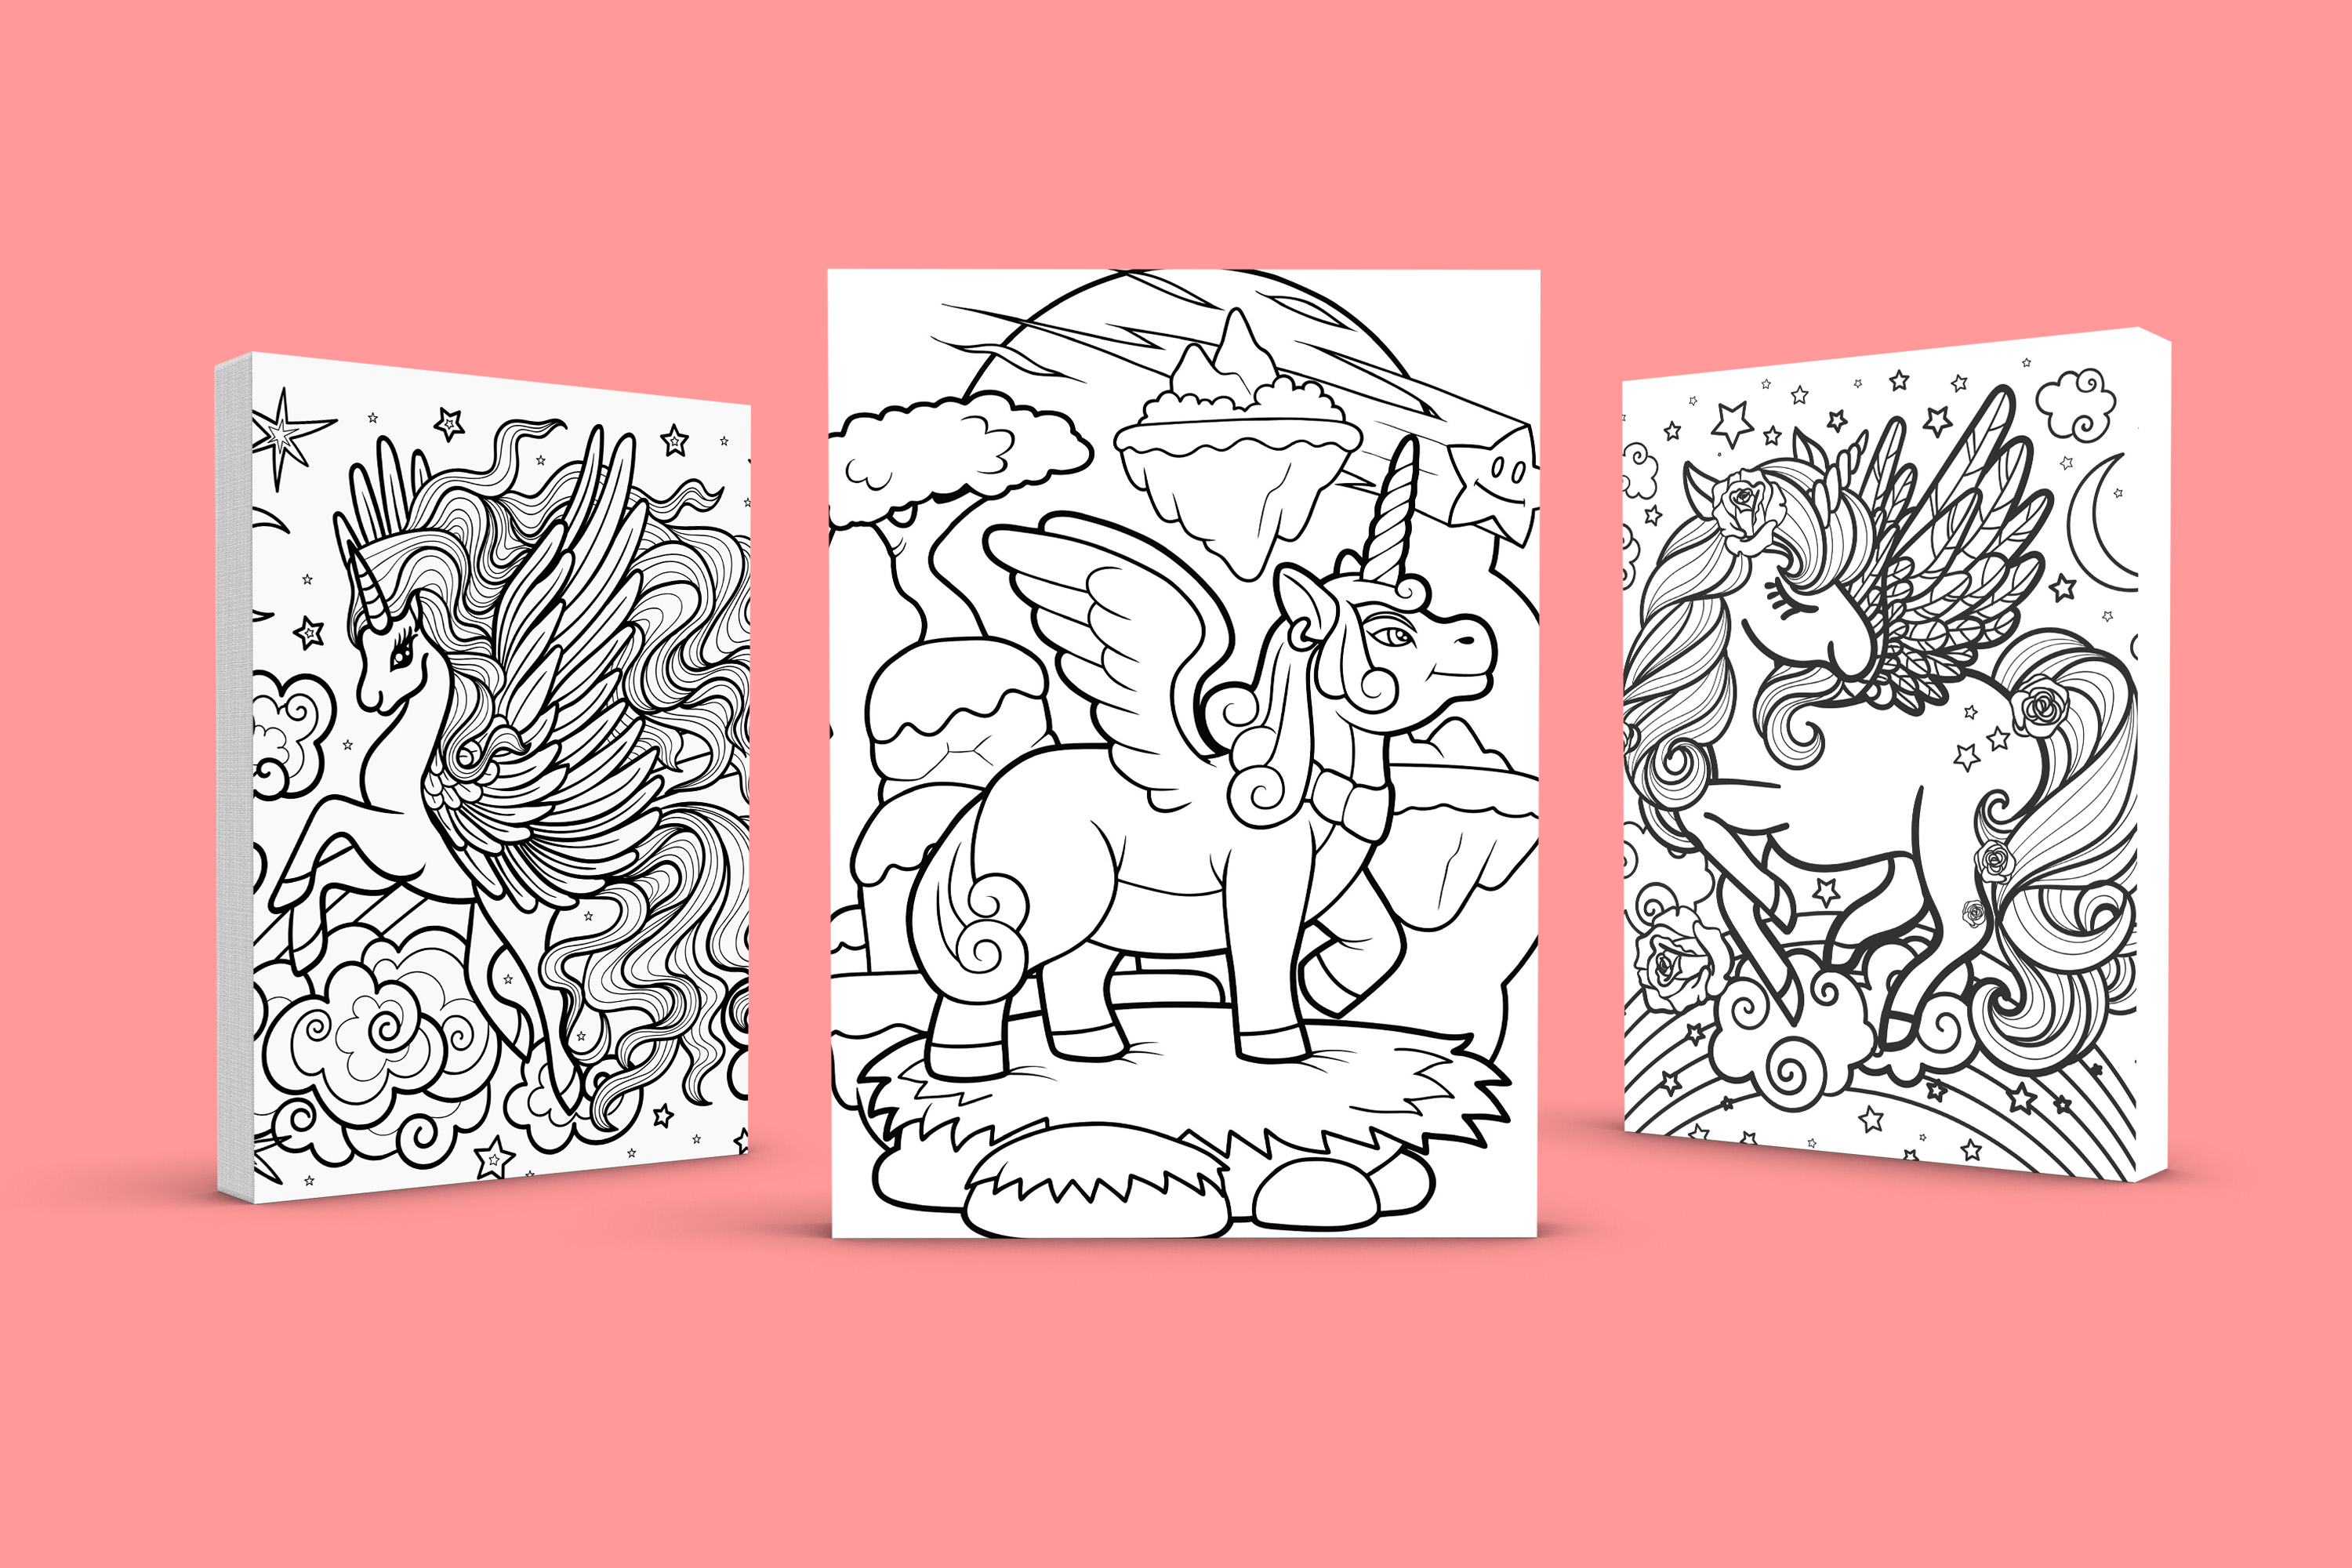 i will make adults or children coloring book pages for amazon KDP business